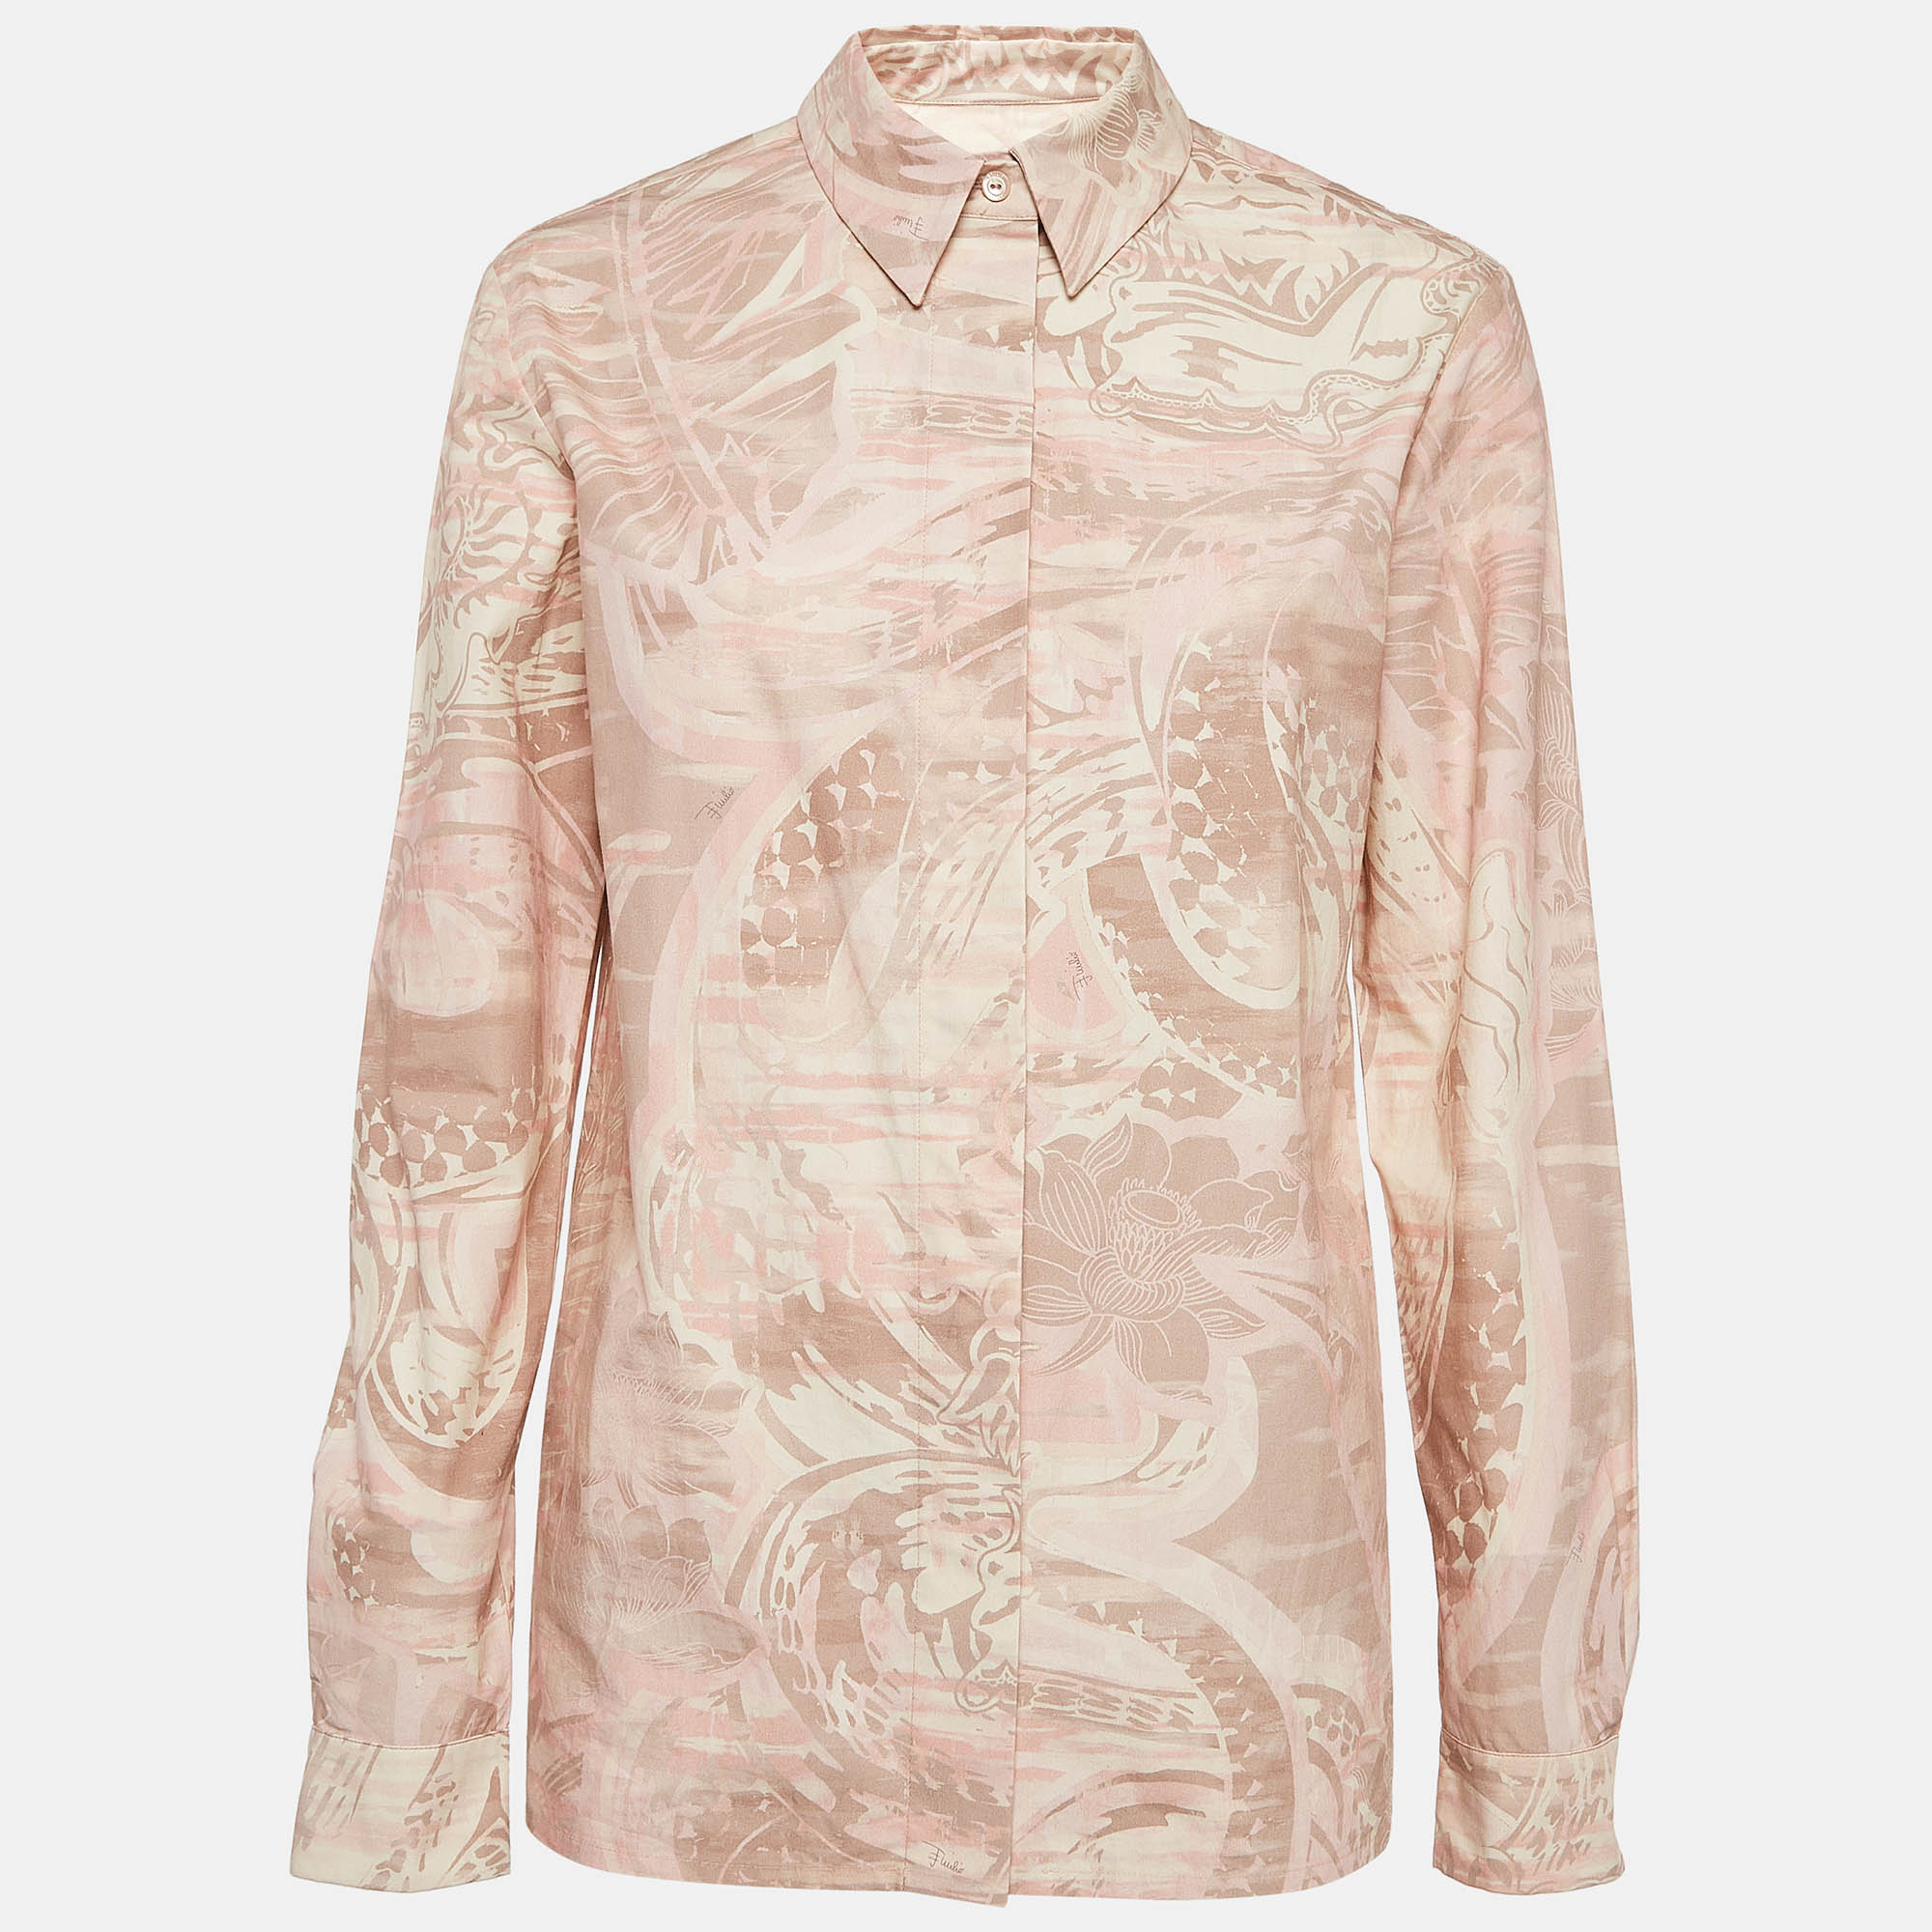 Emilio pucci printed cotton long sleeve shirt s